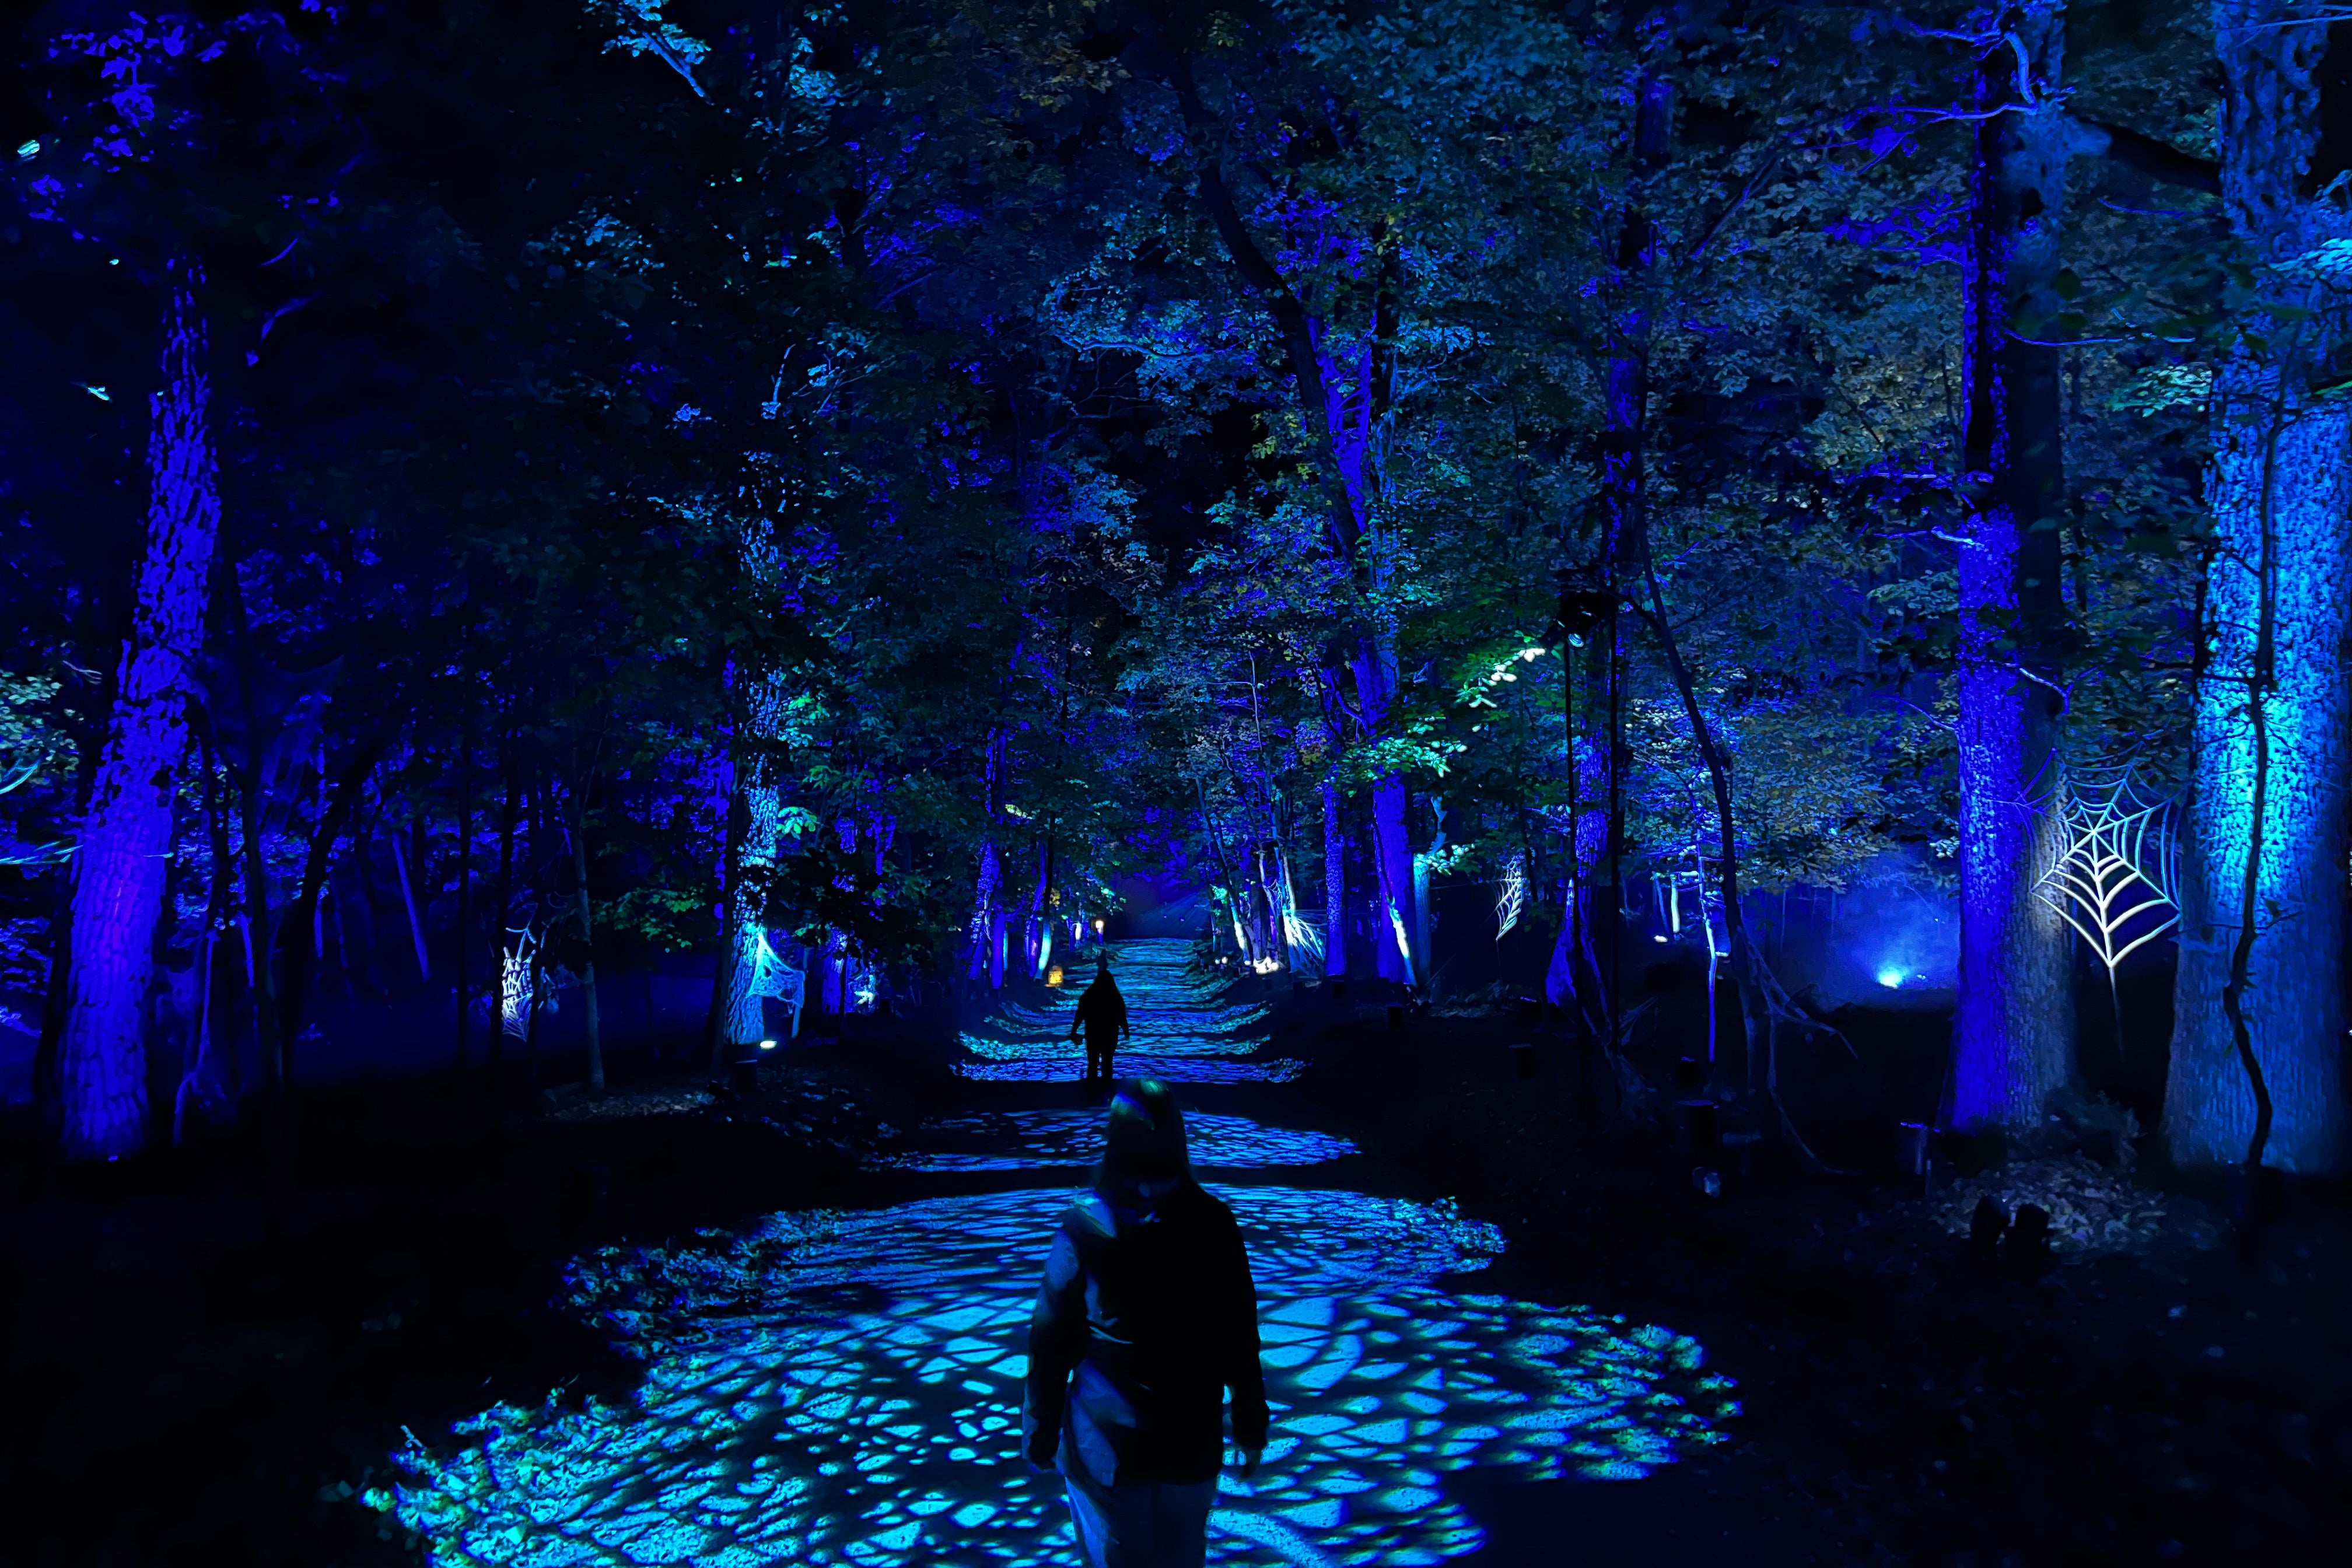 A teenager walks down a pathway between the trees, vividly illuminated in purple and blue.